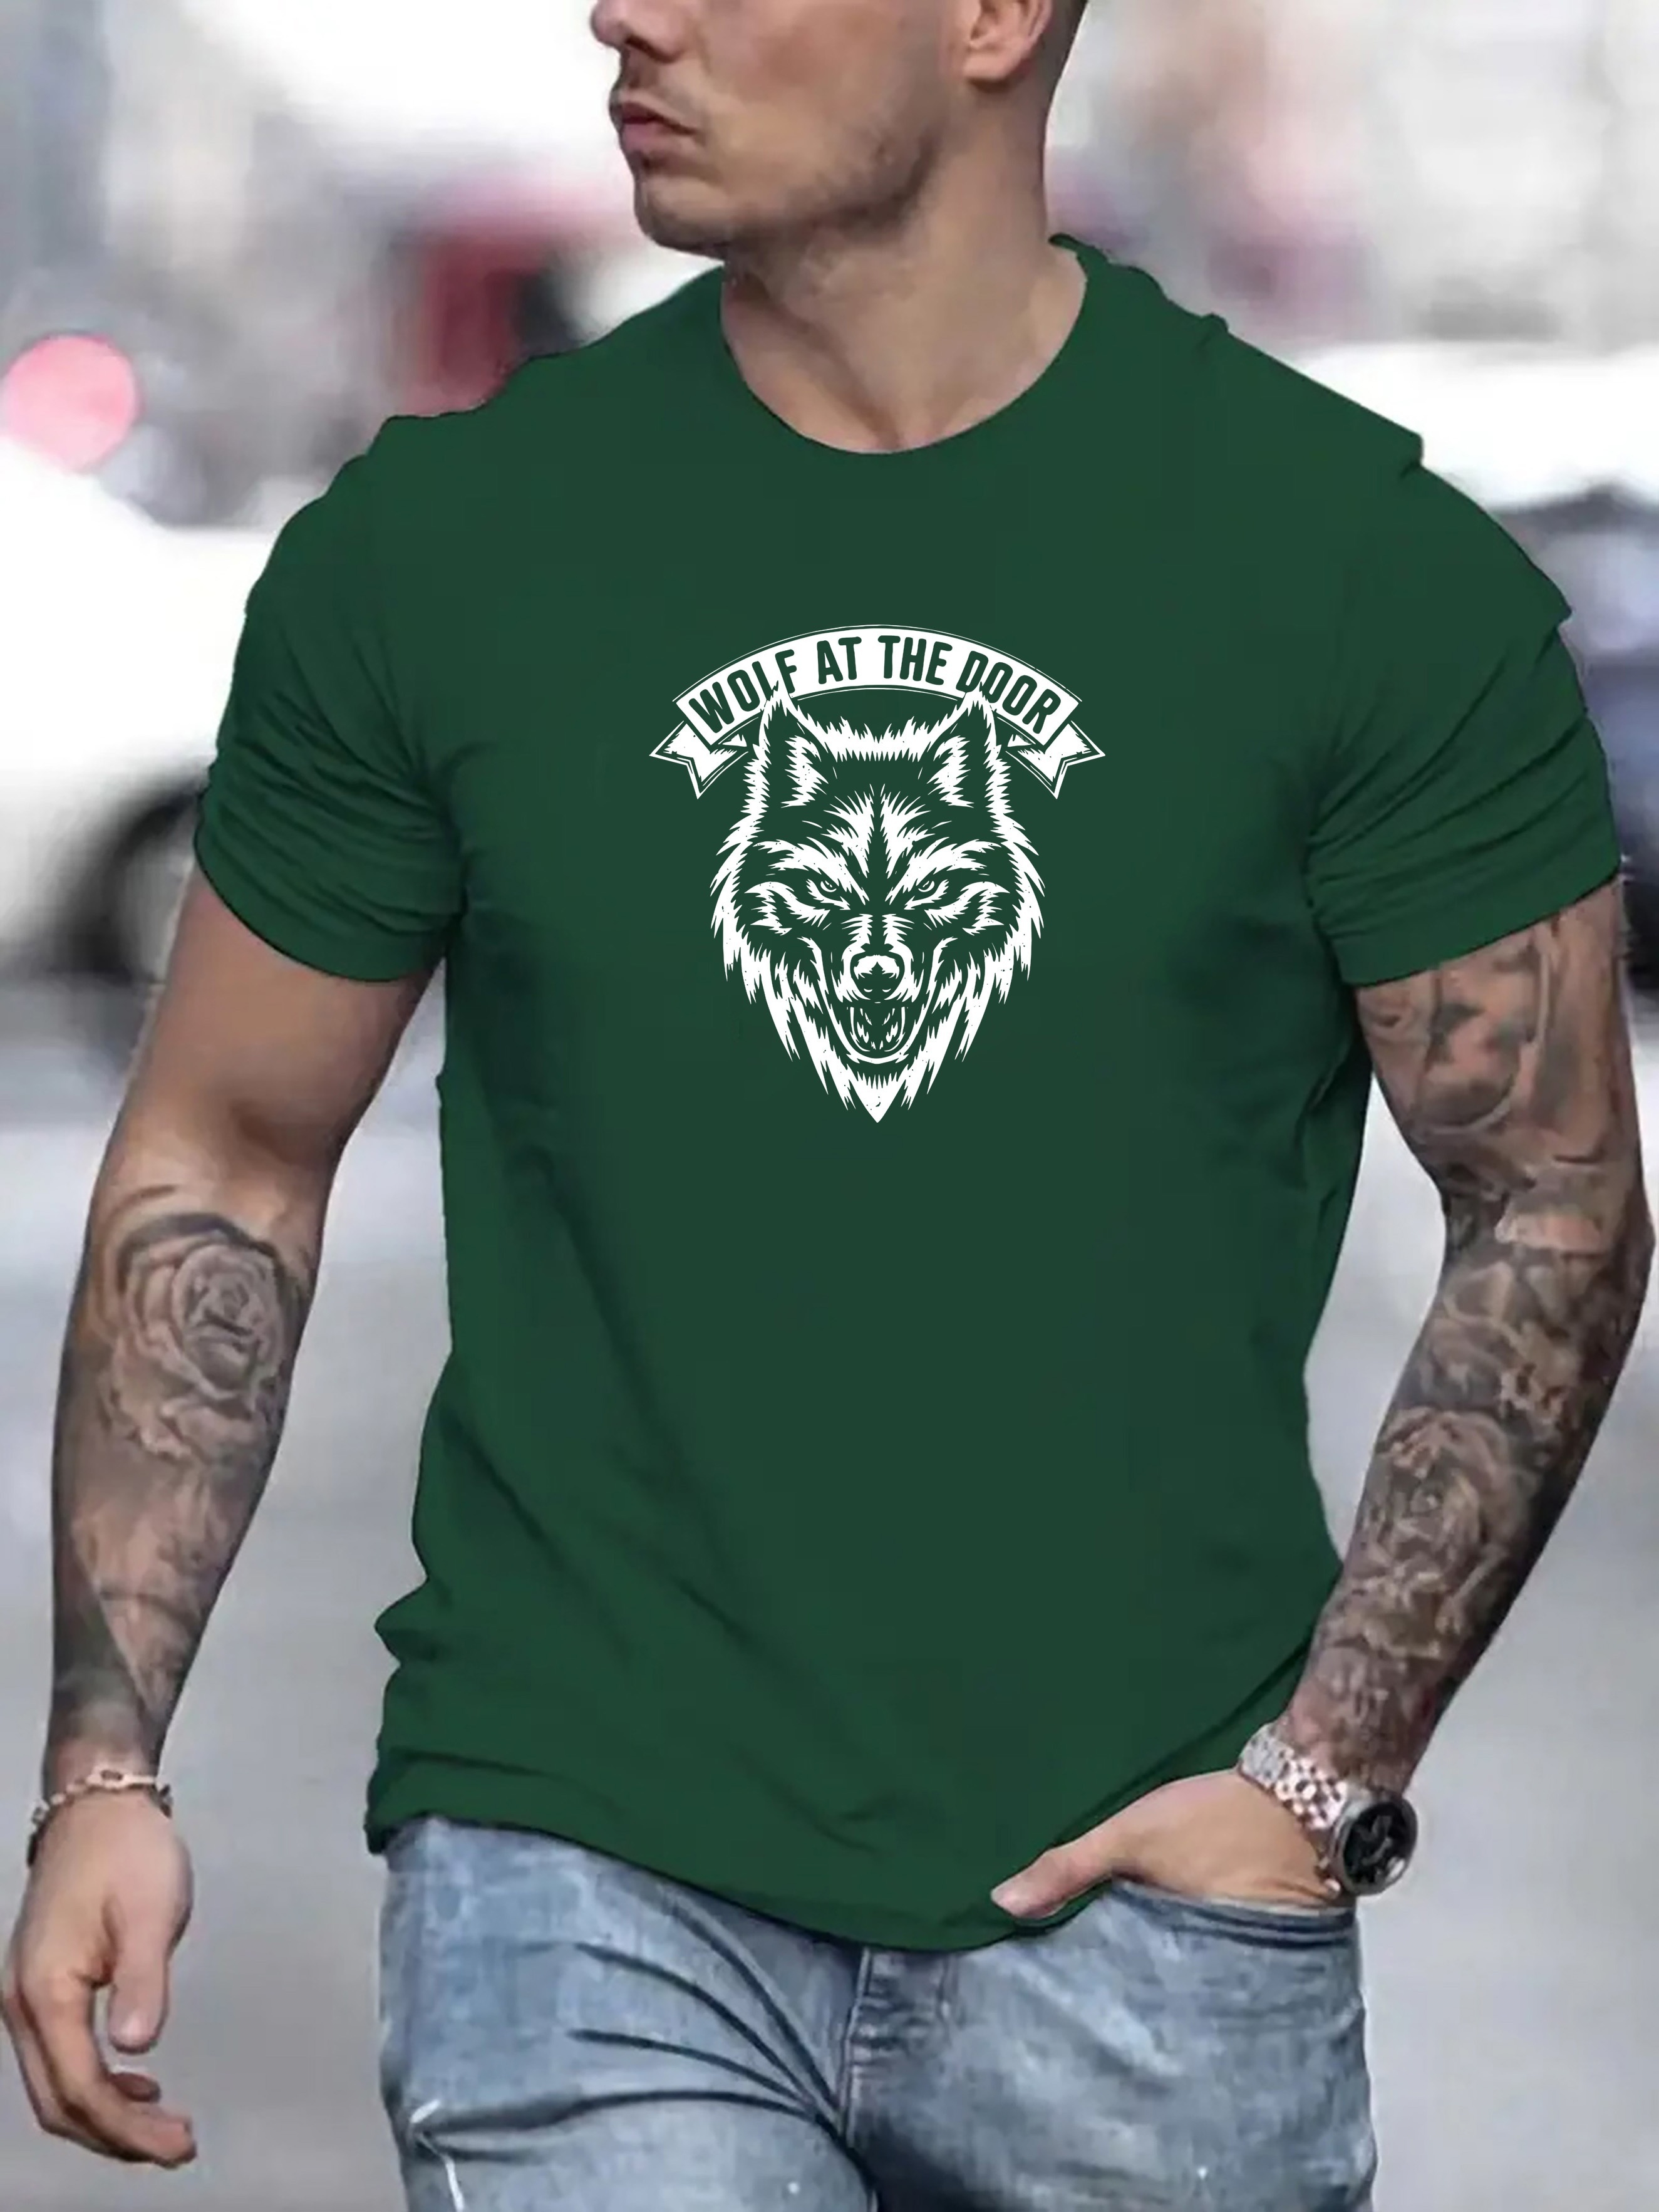 Wolf Graphic Print Men's Creative Top, Casual Short Sleeve Crew Neck T-shirt, Men's Clothing For Summer Outdoor